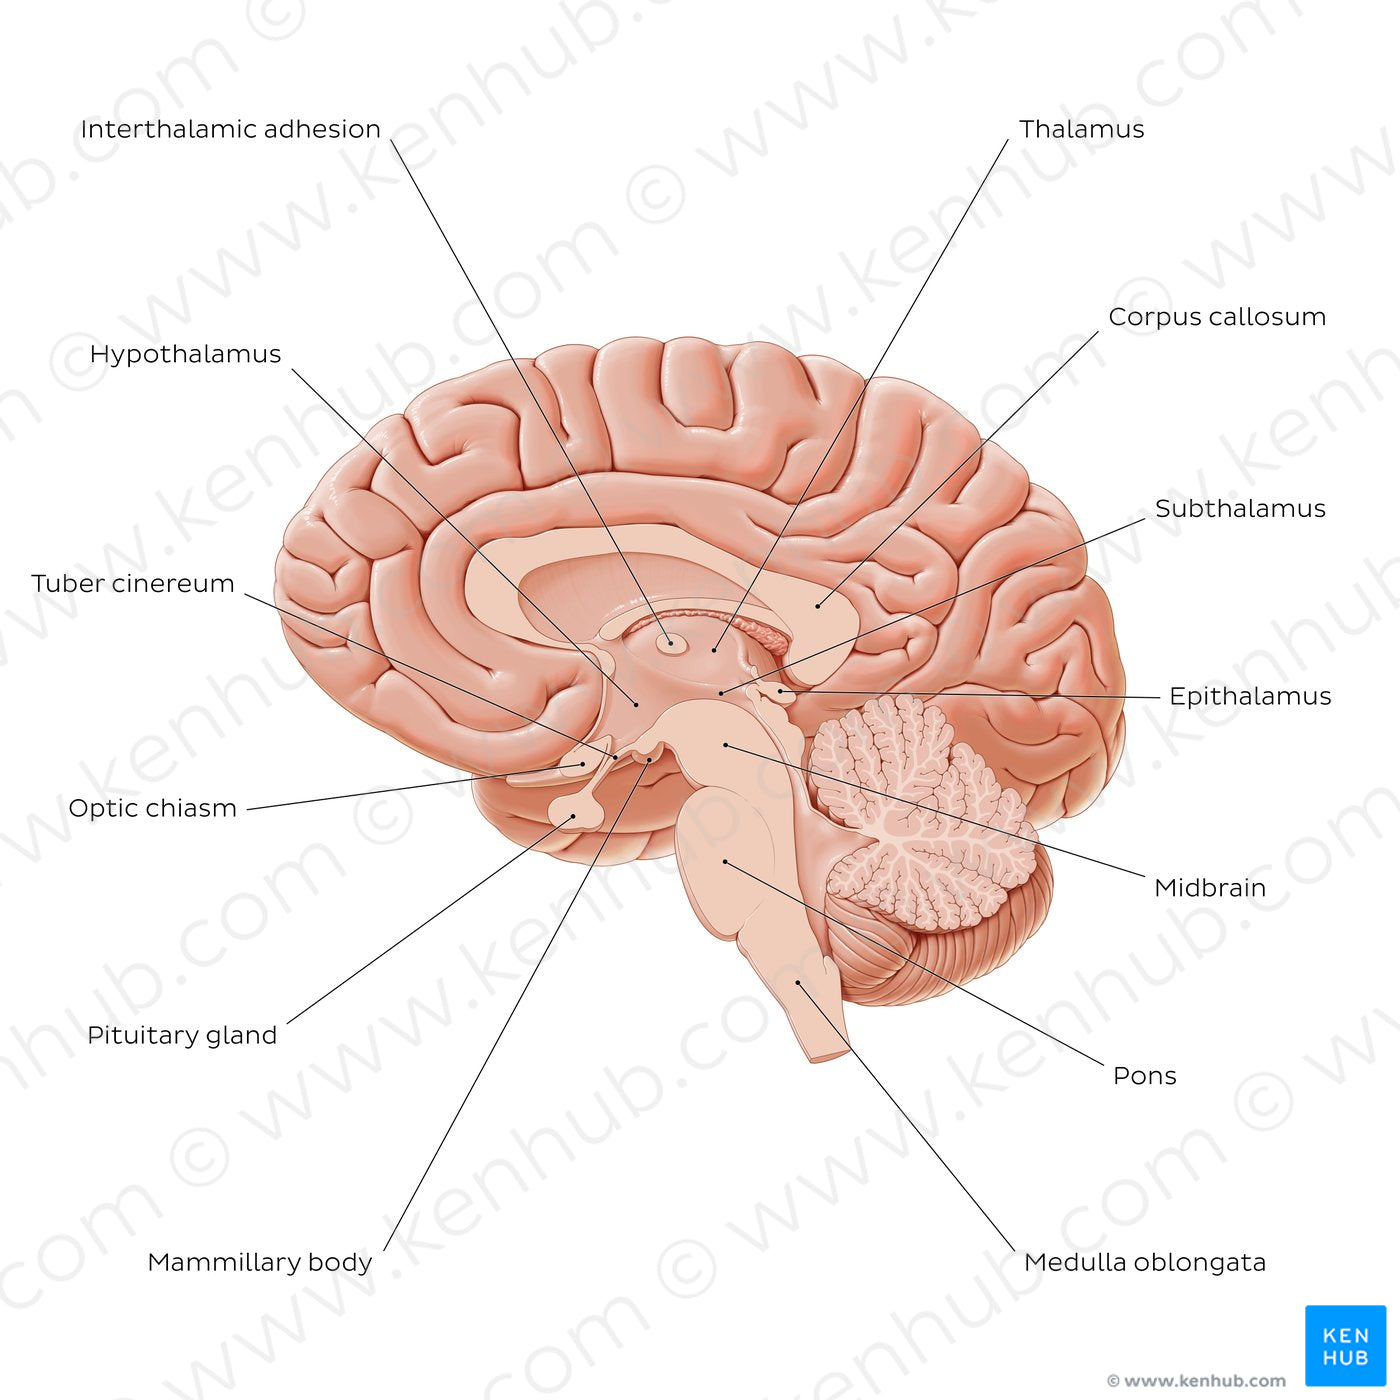 Overview of diencephalon (English)